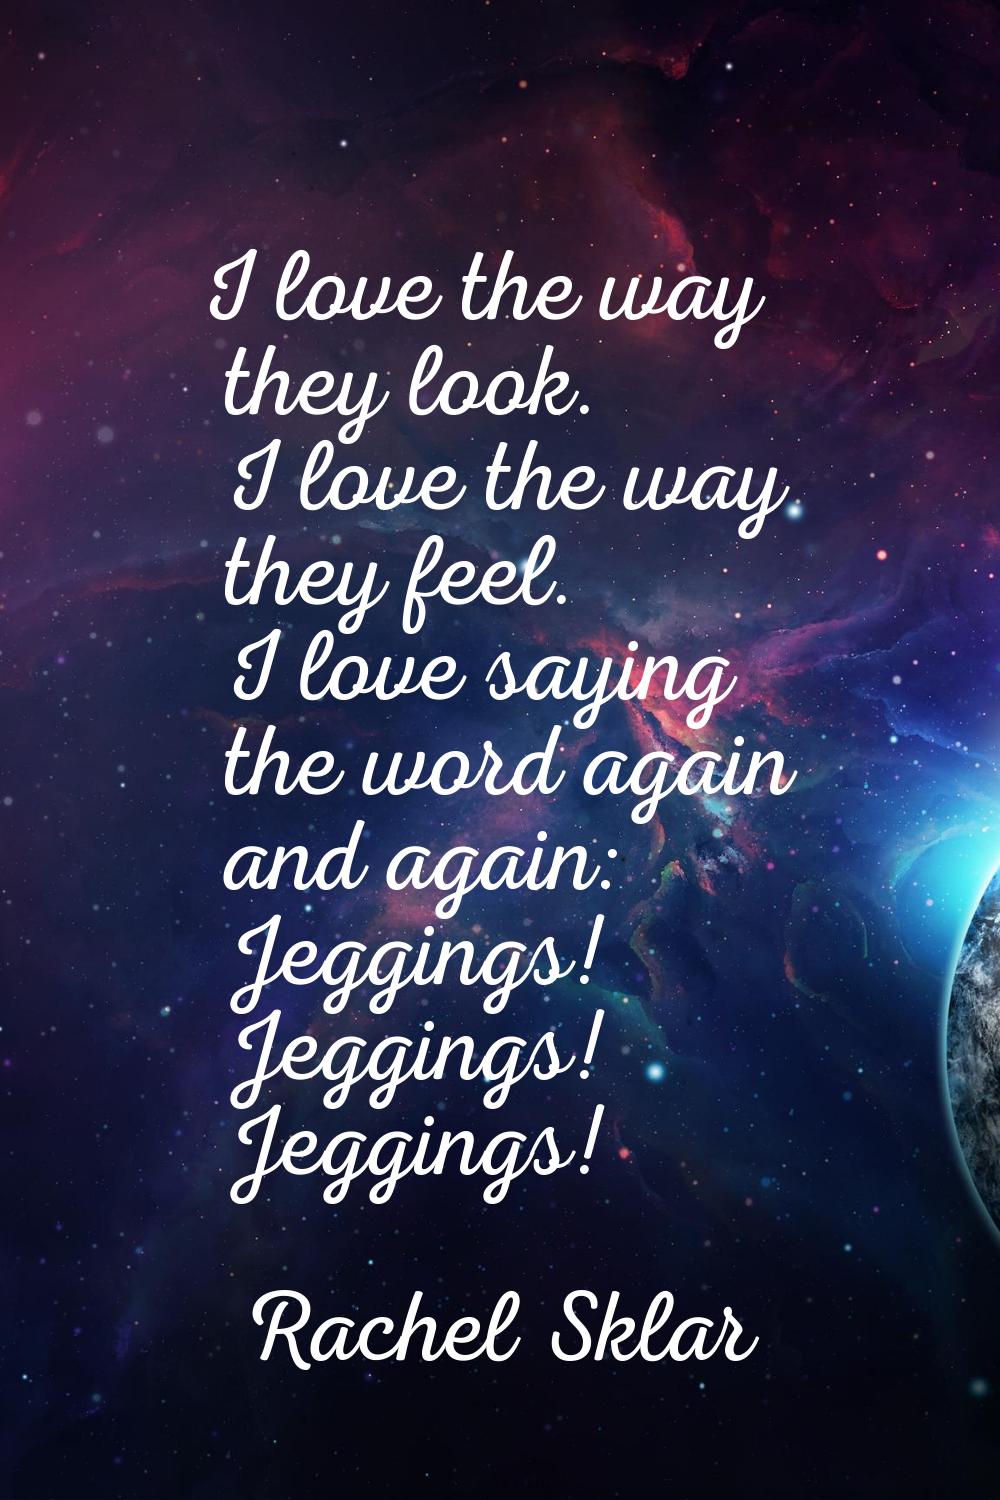 I love the way they look. I love the way they feel. I love saying the word again and again: Jegging